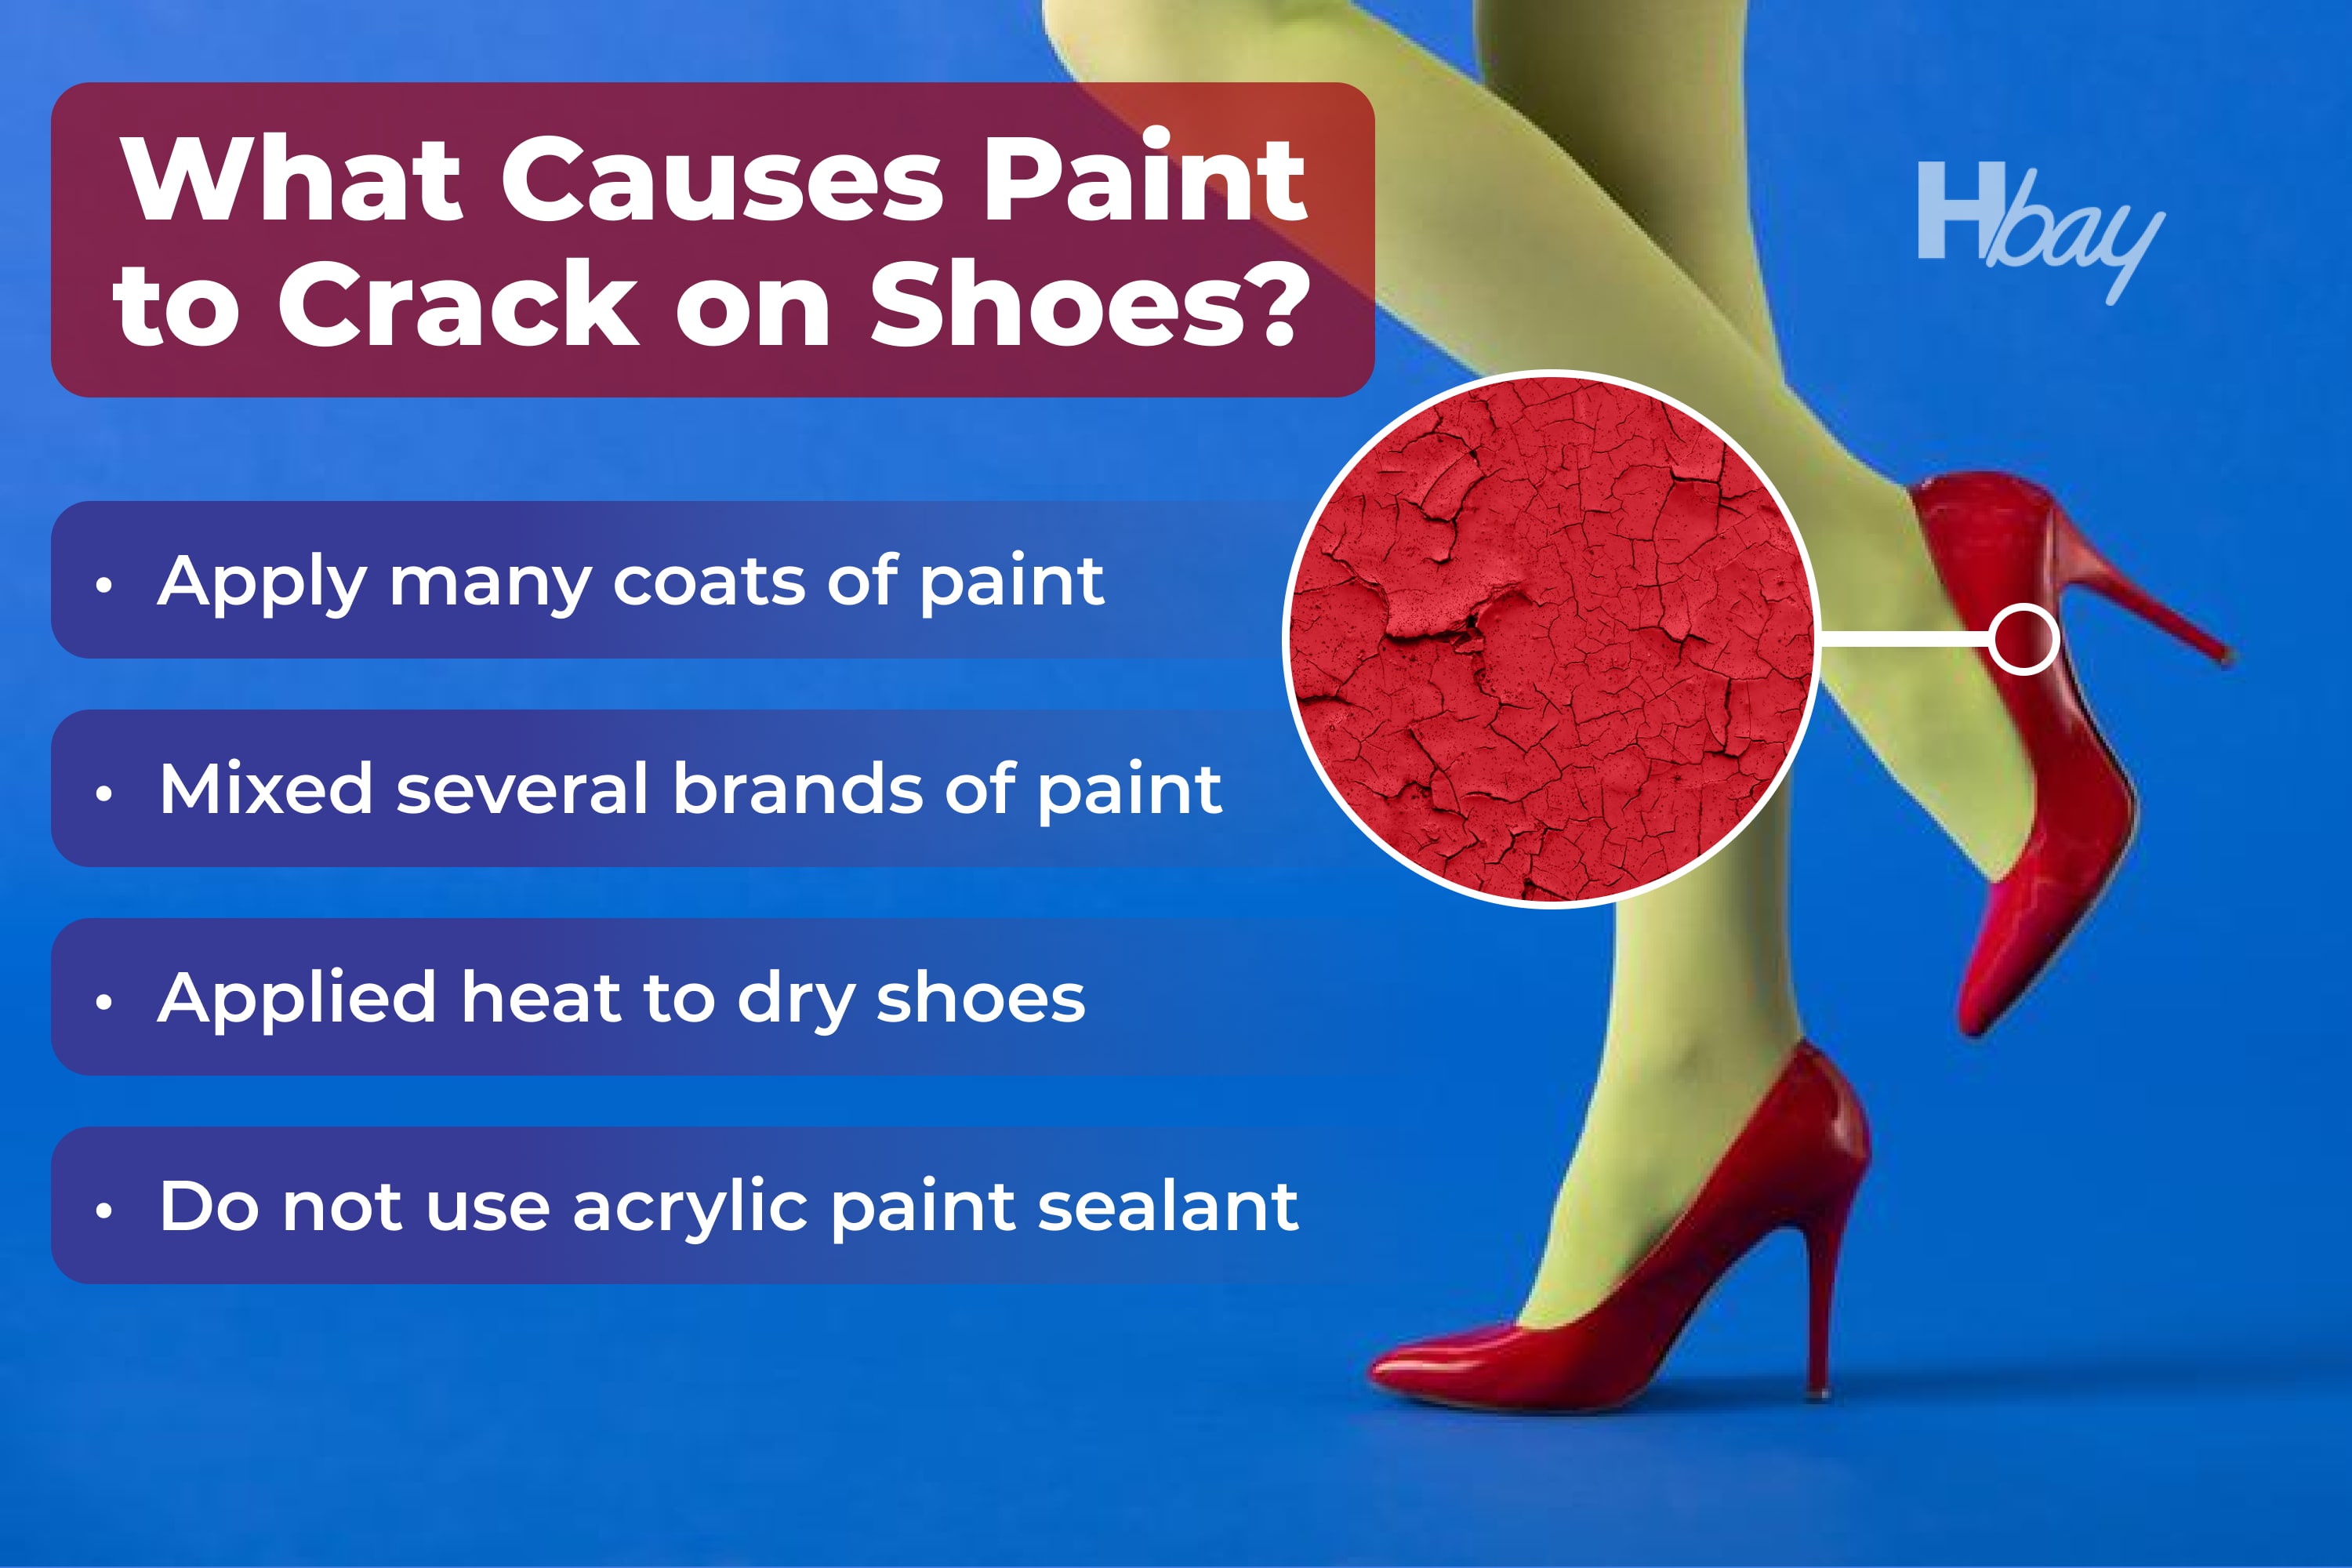 How to Prevent Acrylic Paint From Cracking On Shoes